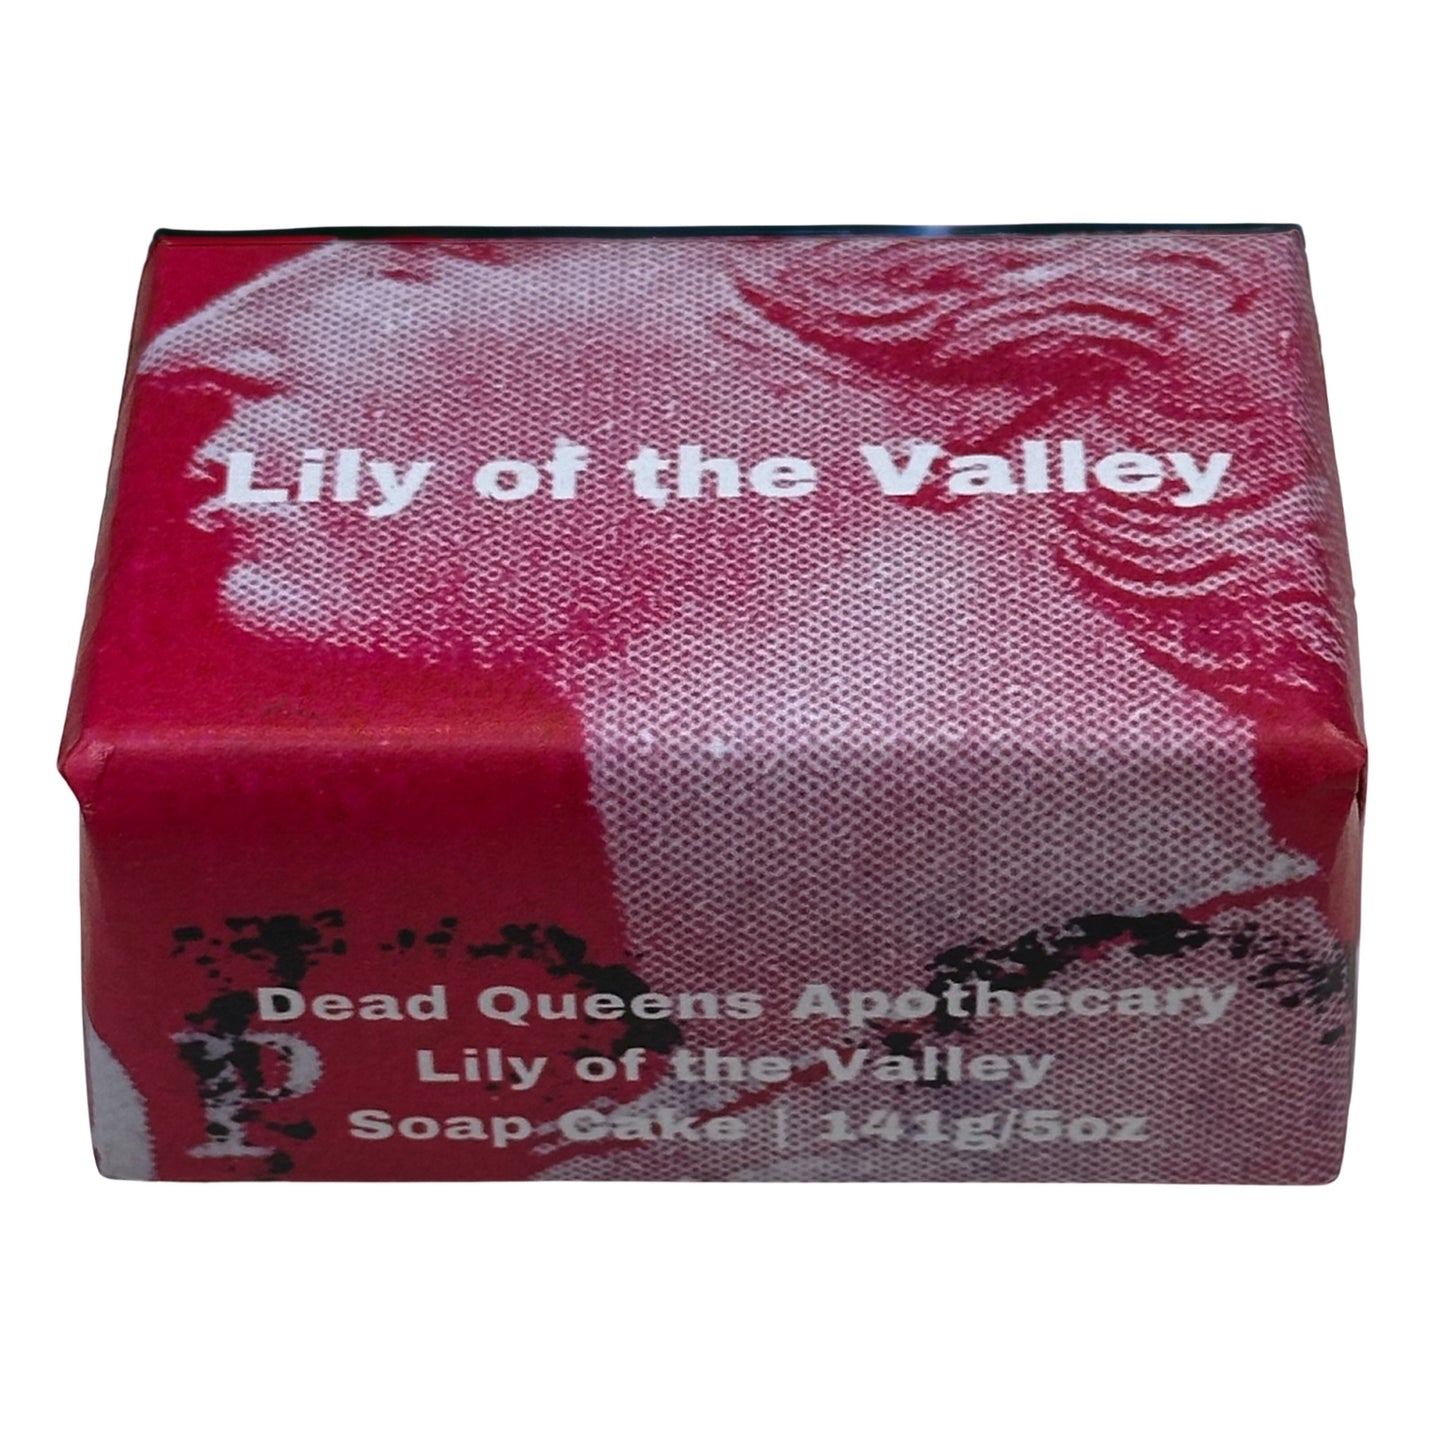 Lily Of The Valley Soap Cake - Royal Apothecary-2